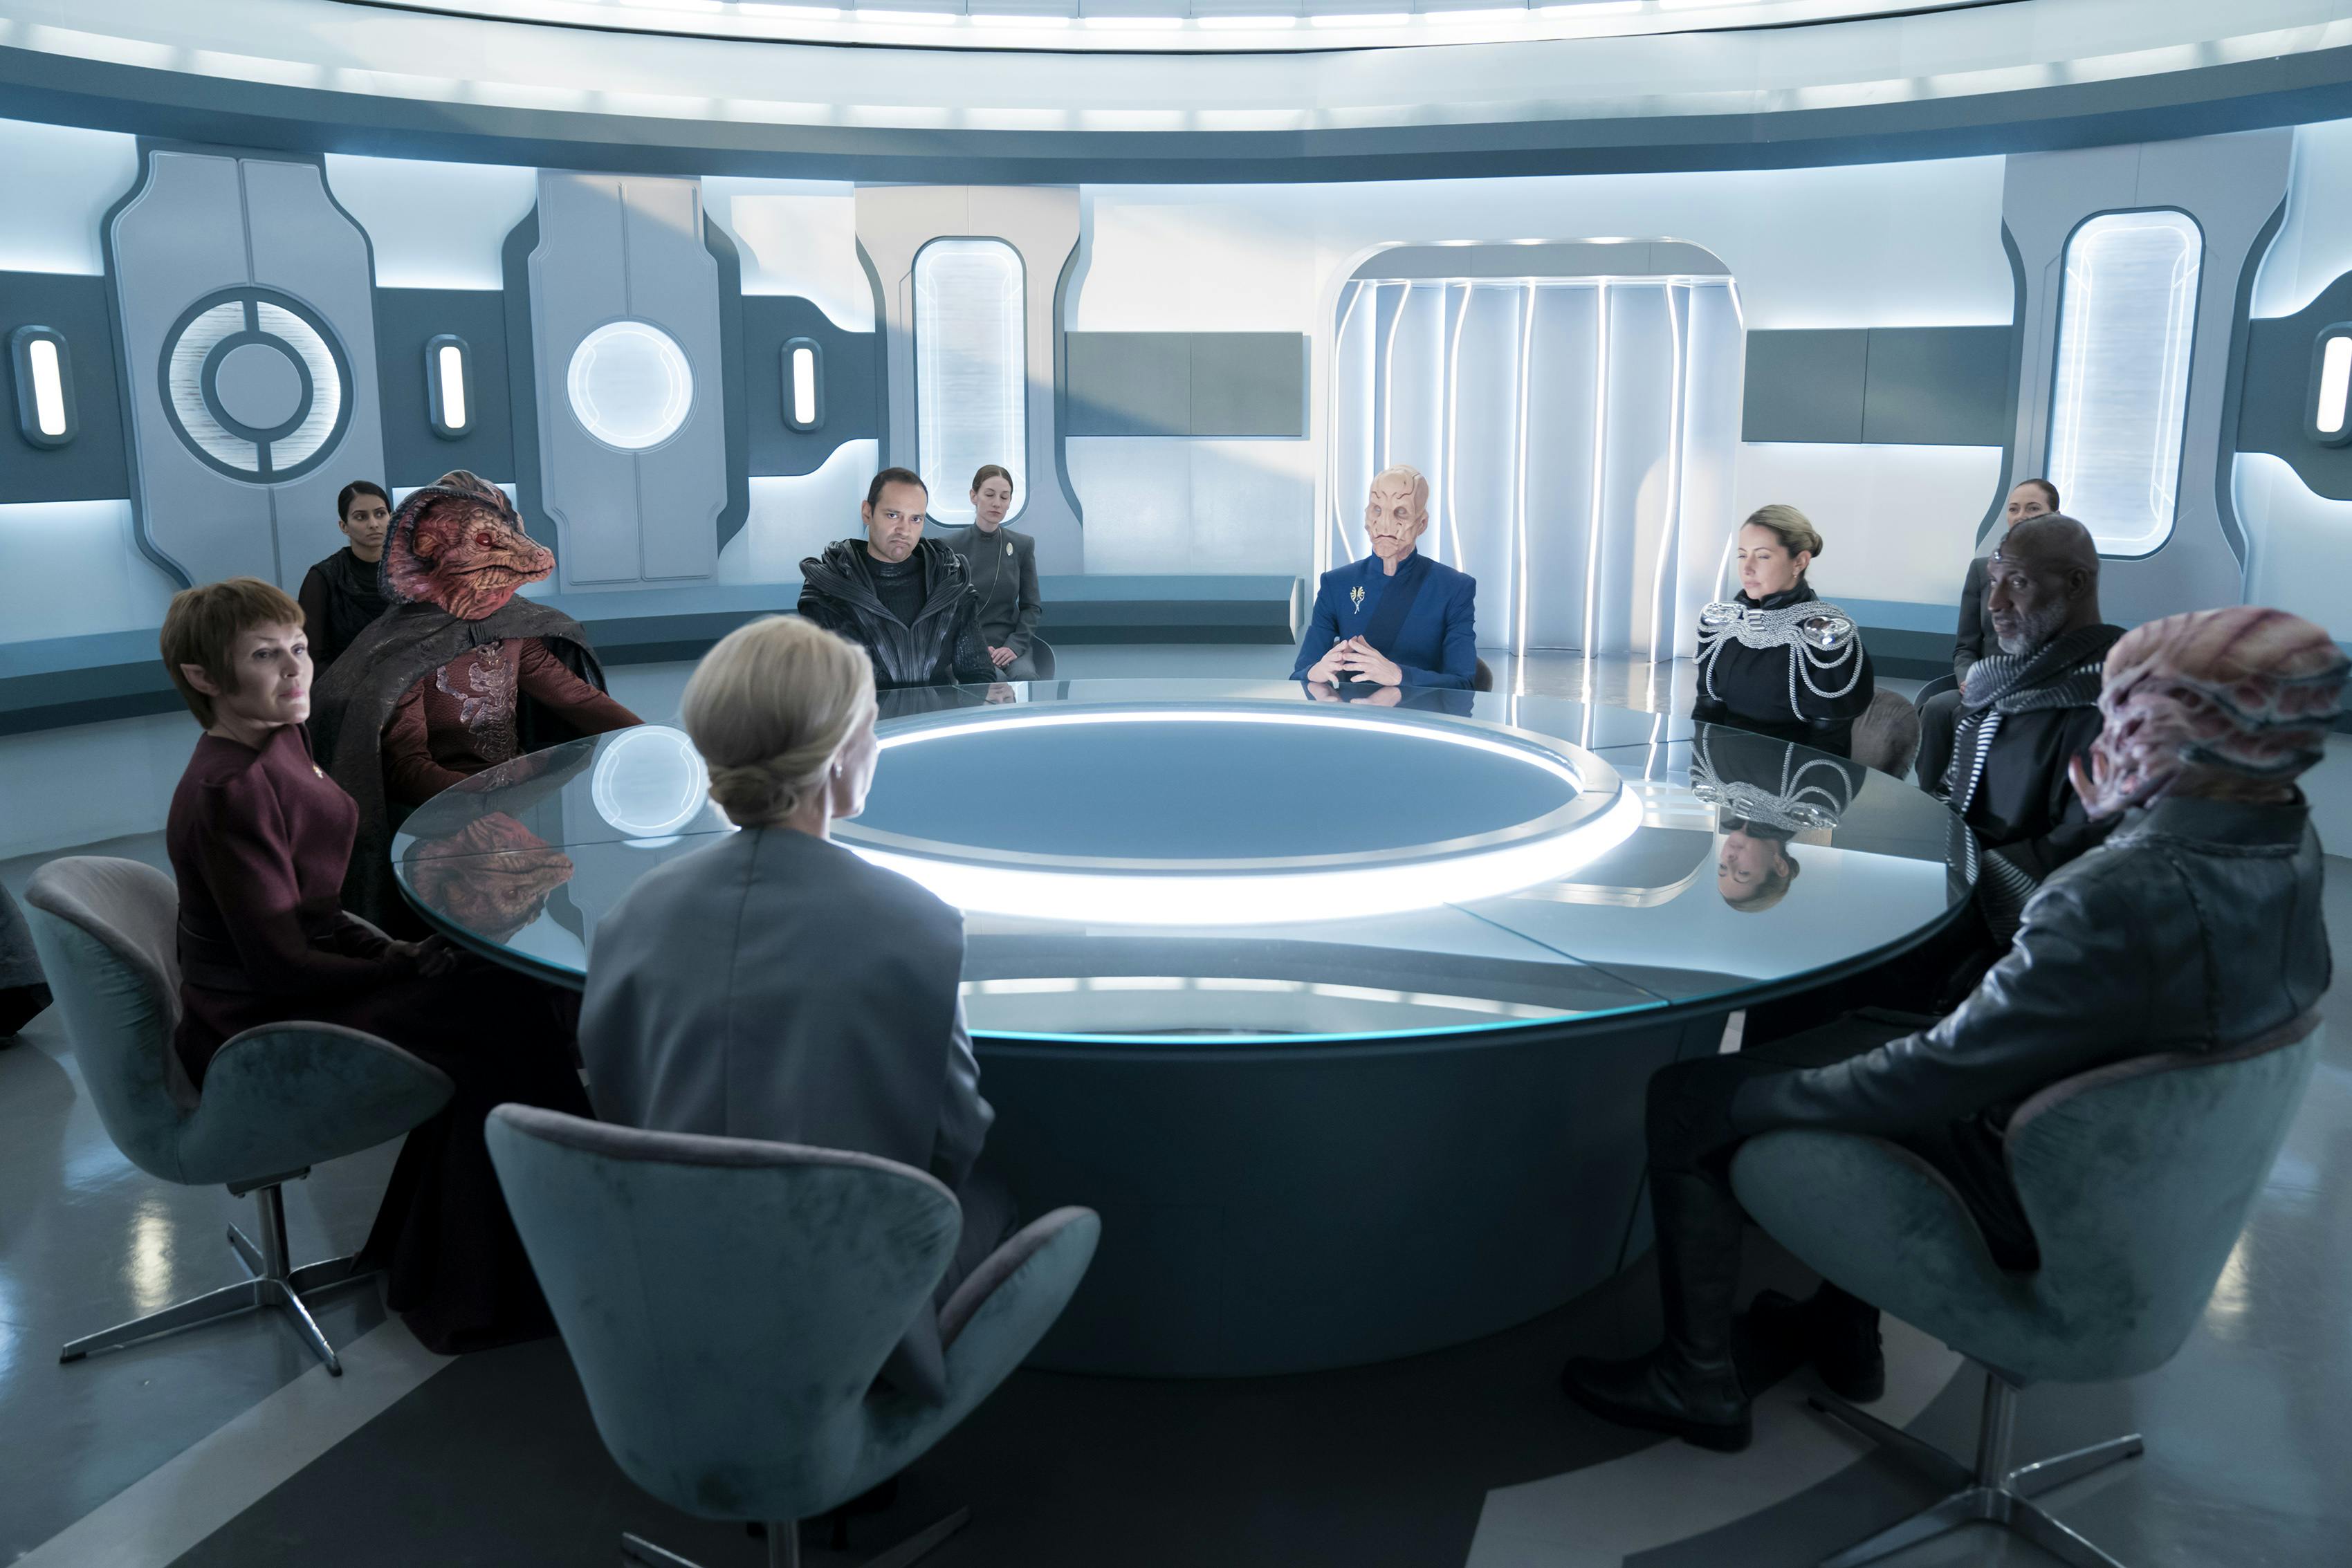 At Federation Headquarters, President T'Rina sits with Saru, a moderator, and a handful of Federation delegates around a conference table while their aides sit in the background in 'Jinaal'